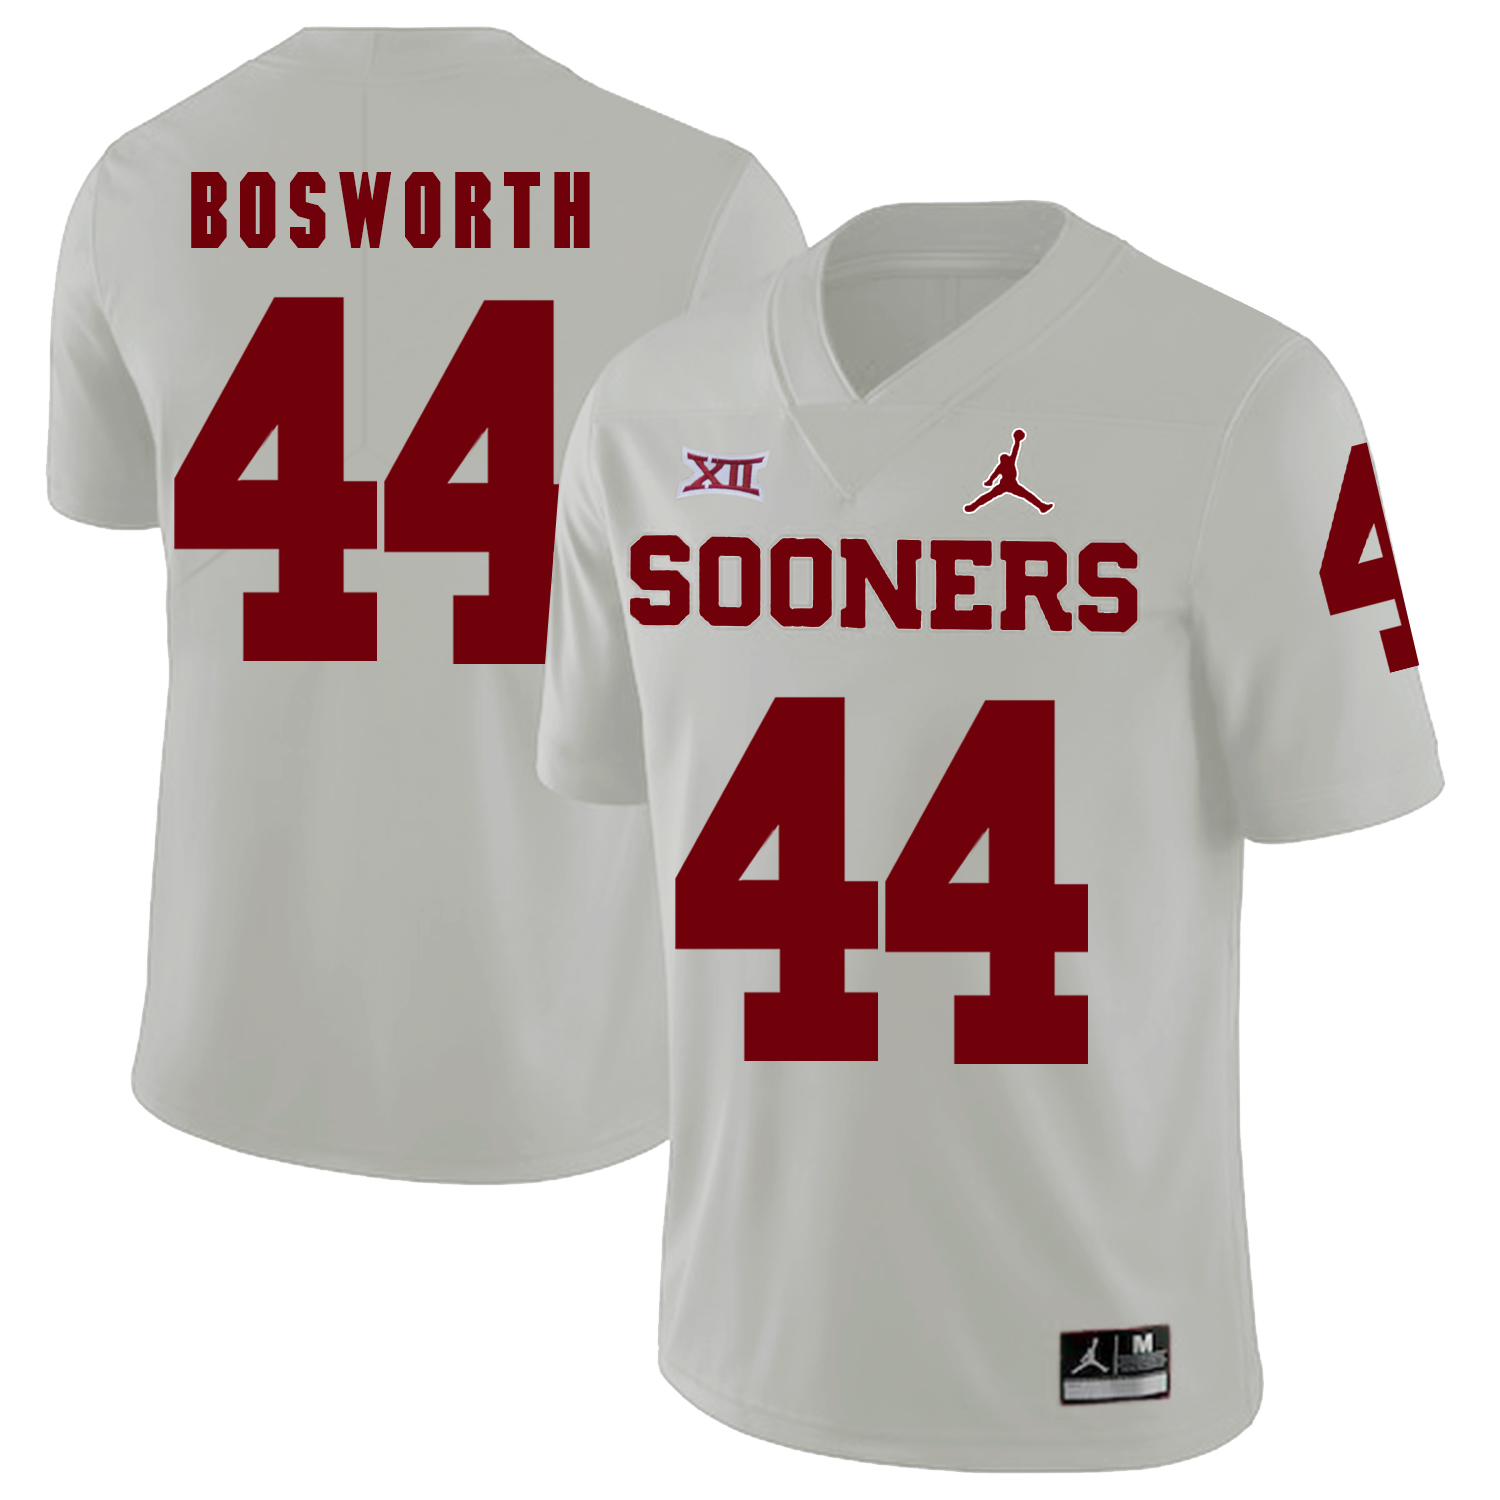 Oklahoma Sooners 44 Brian Bosworth White College Football Jersey